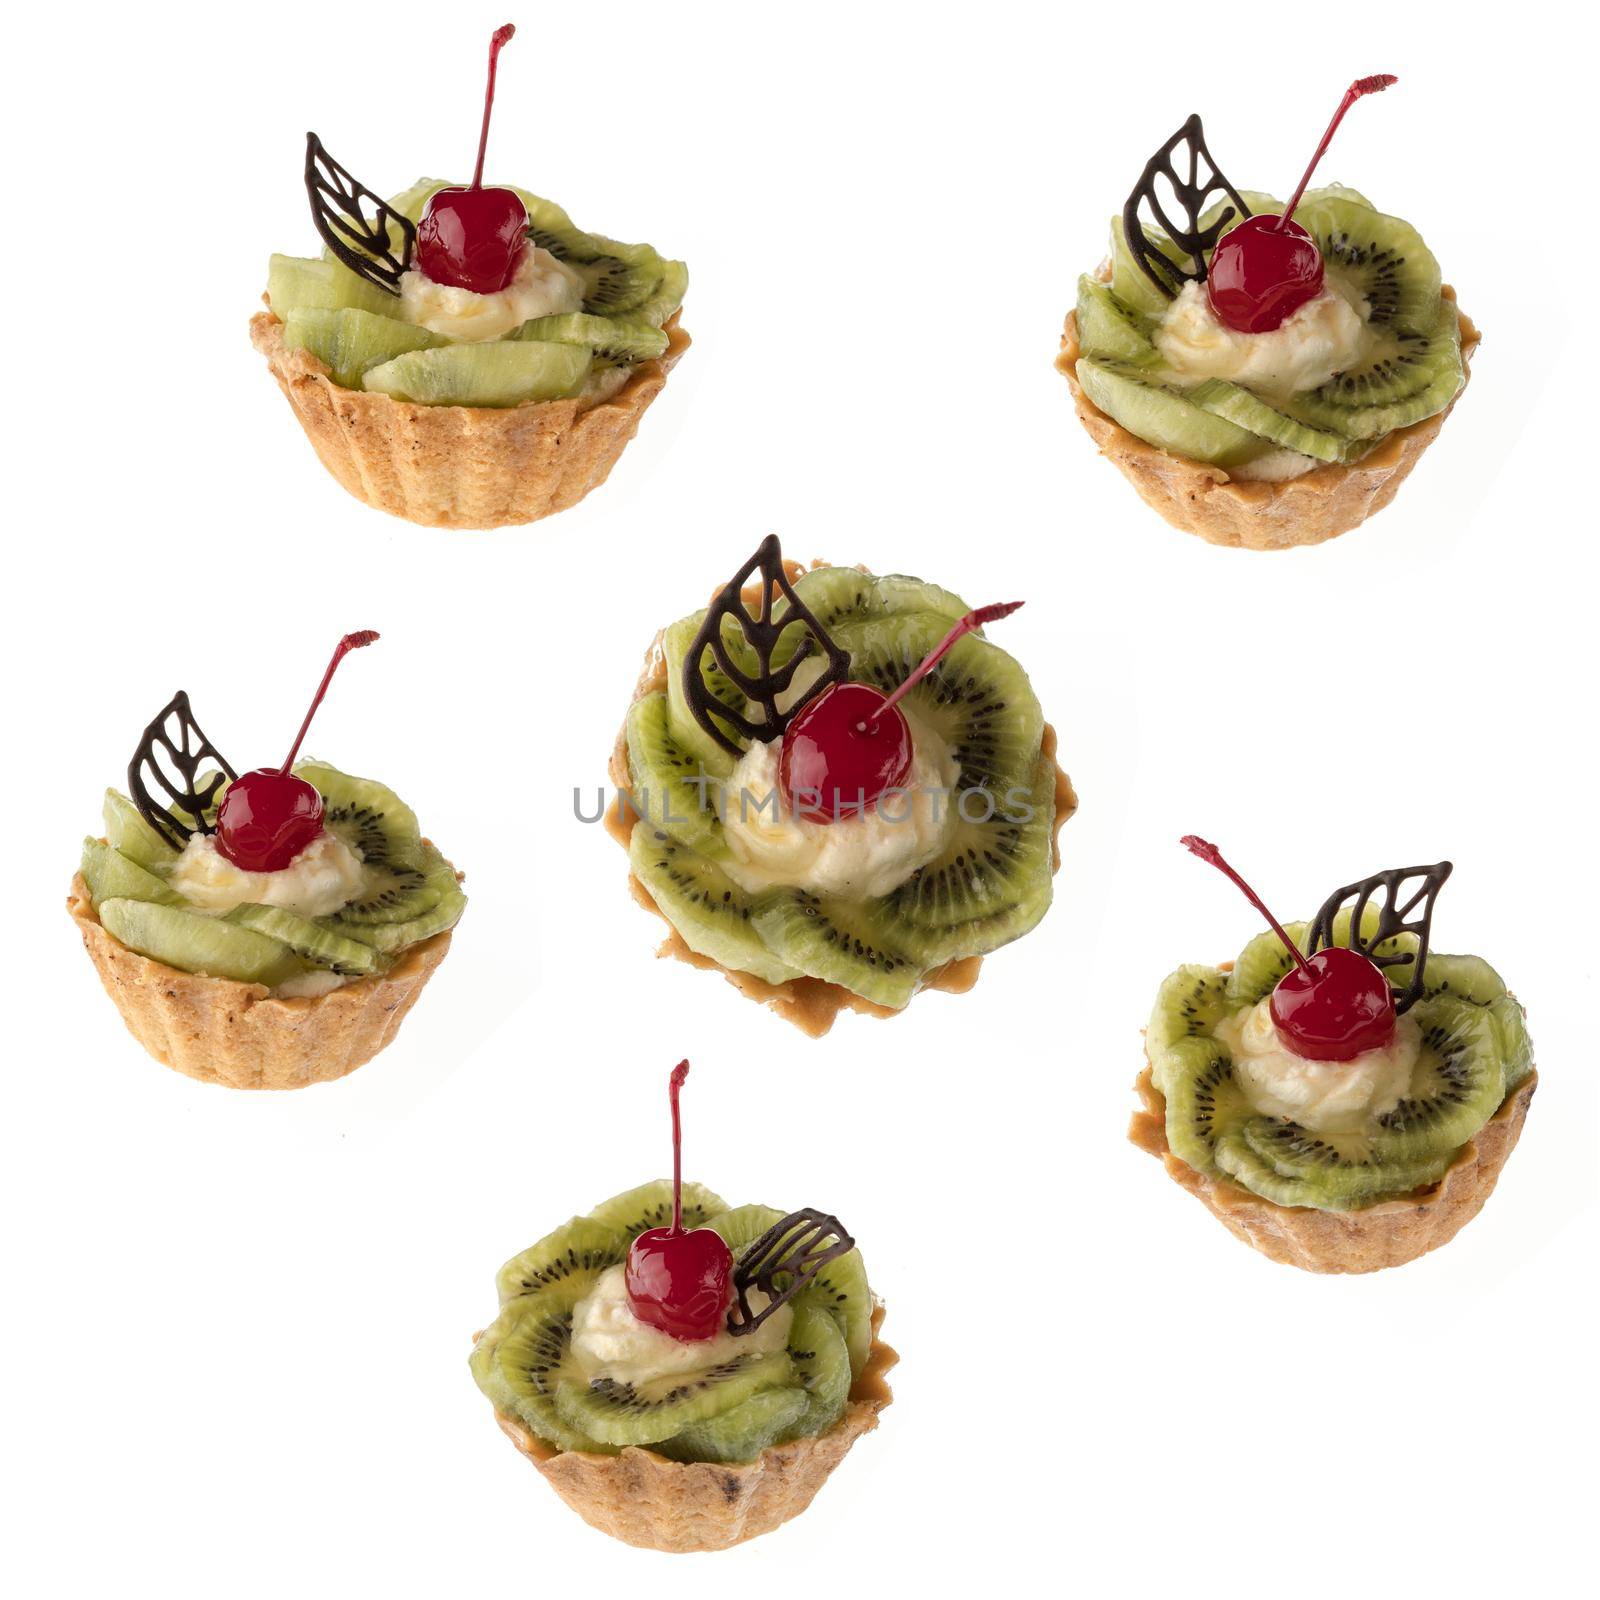 Dessert, cake with kiwi and cherries on a white plate isolated